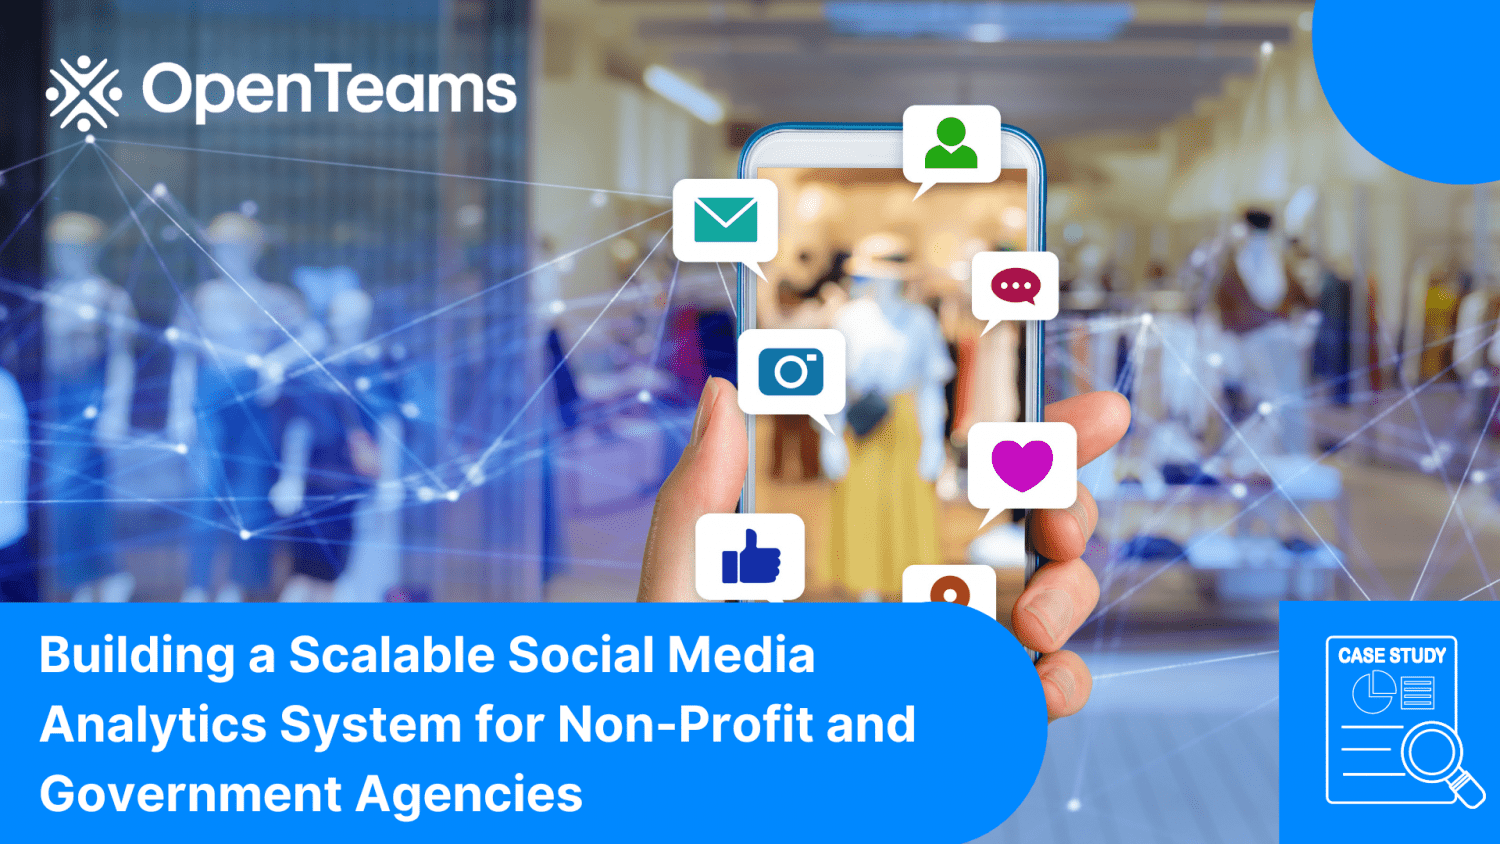 Building a Scalable Social Media Analytics System for Non-Profit and Government Agencies